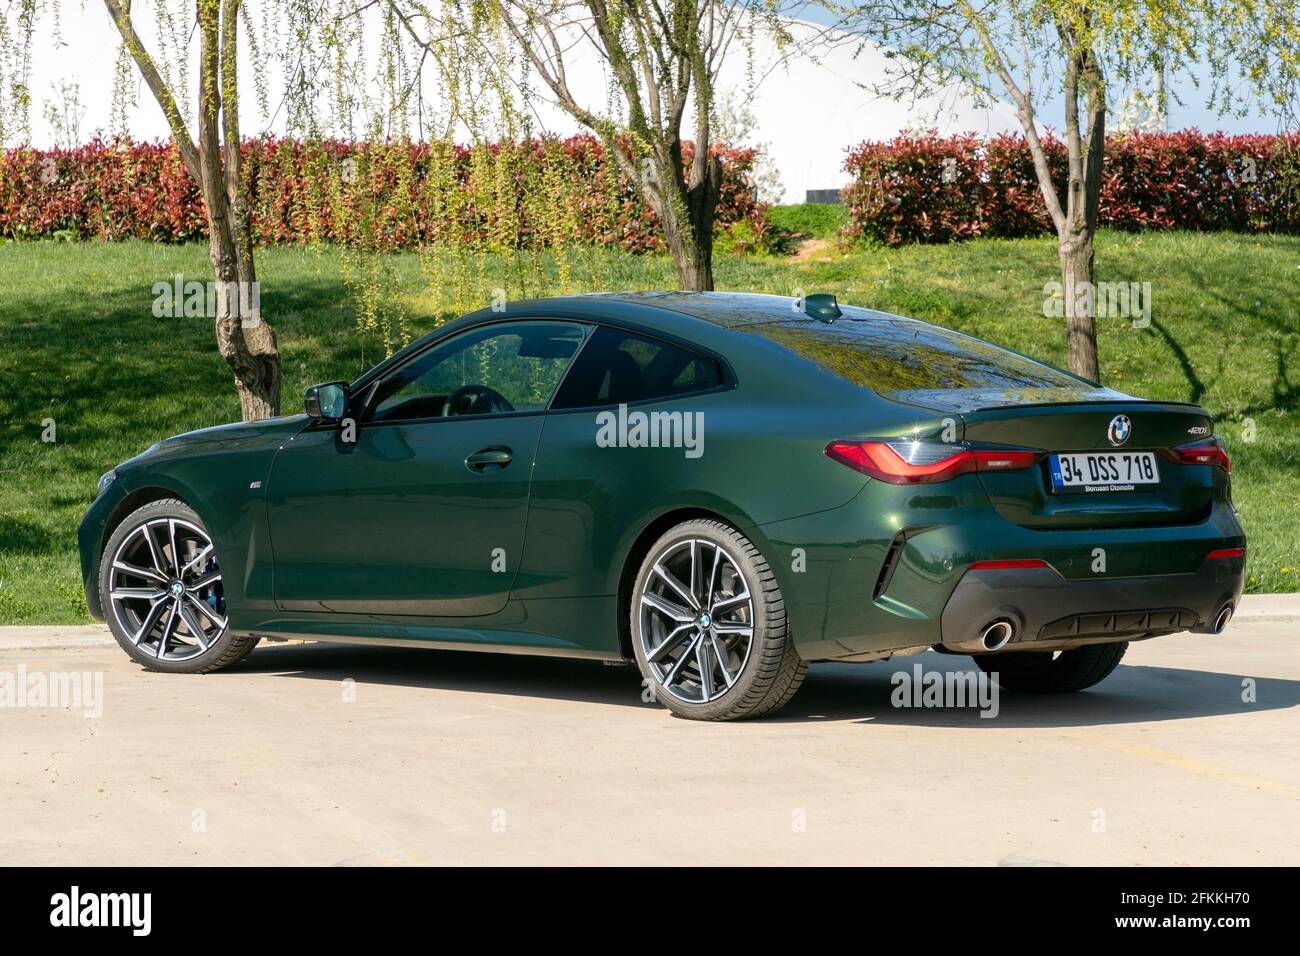 BMW 4 Series is a range of compact executive cars manufactured by BMW. A  green BMW 420i coupe car is parked on road Stock Photo - Alamy